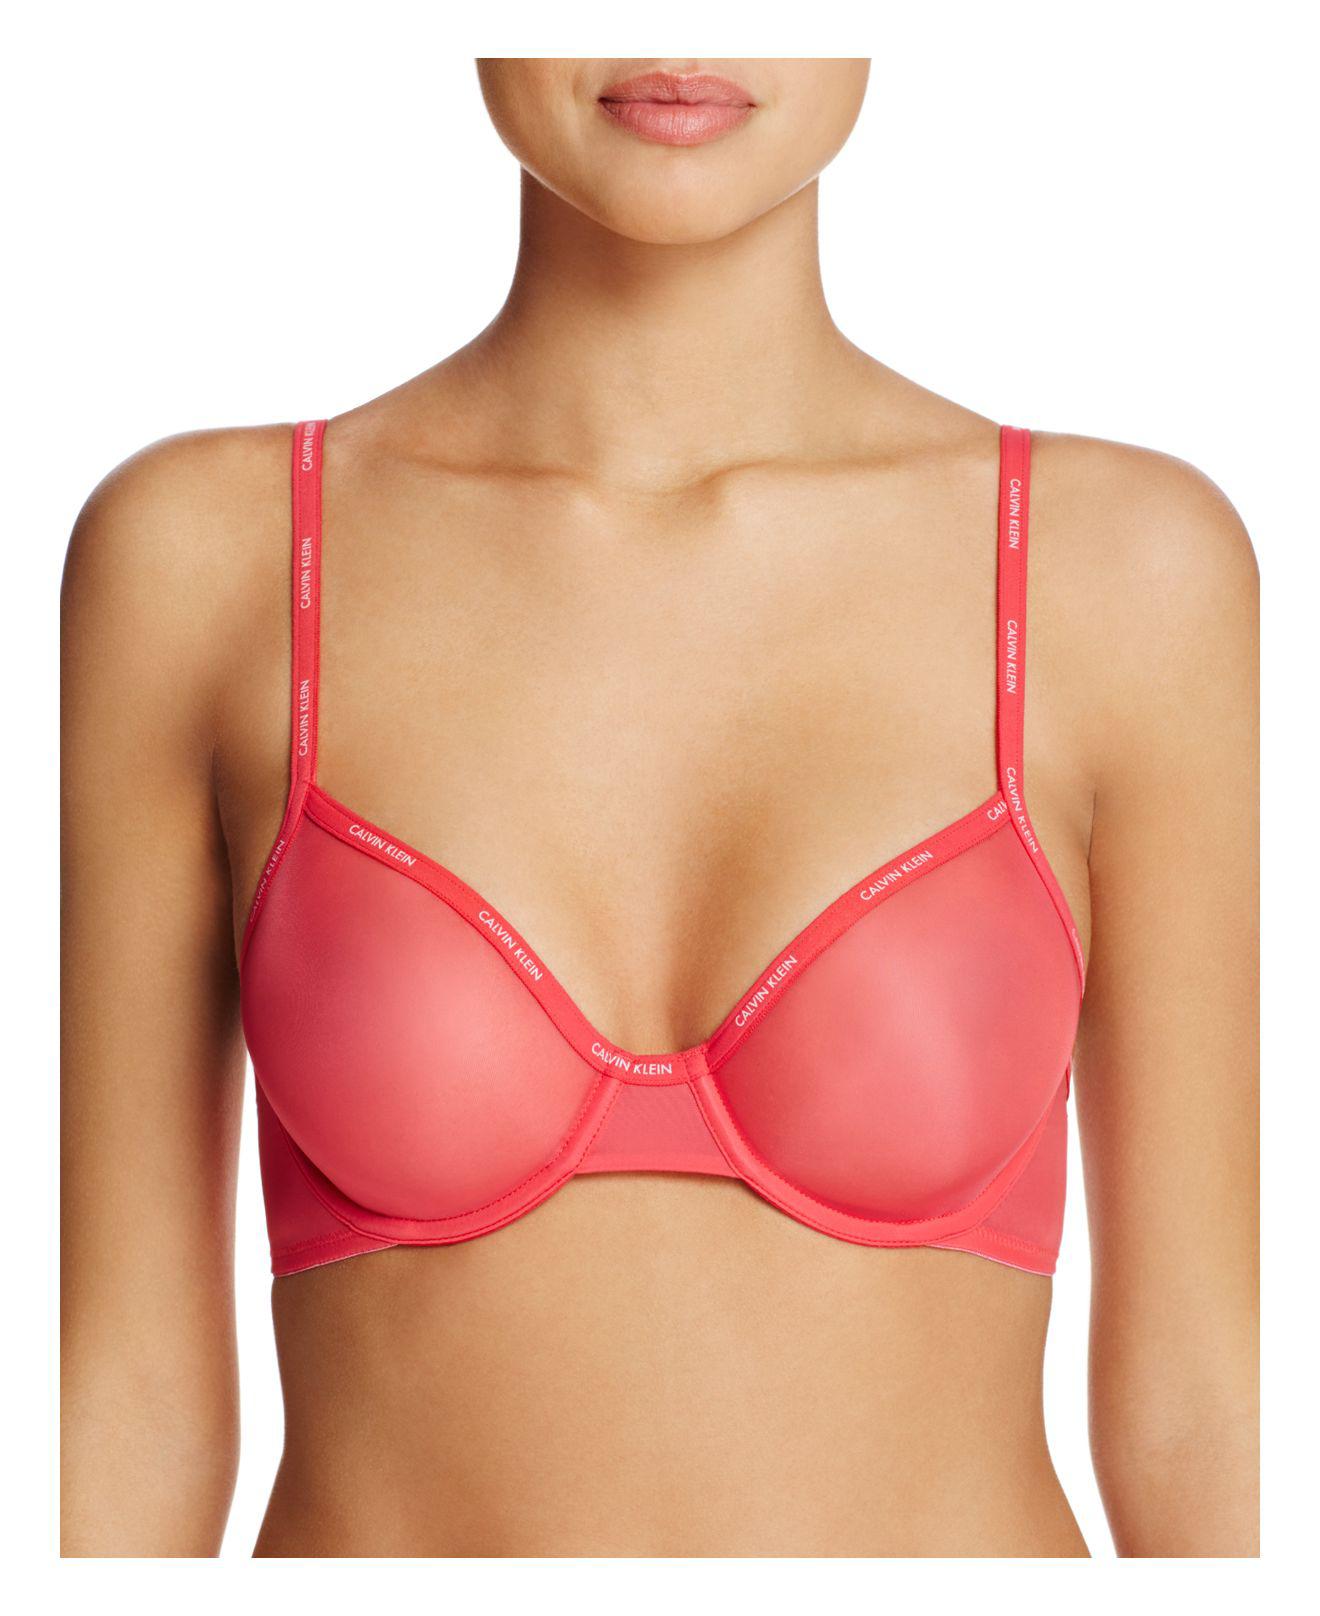 CALVIN KLEIN 205W39NYC Sheer Marquisette Unlined Underwire Bra in Red - Lyst